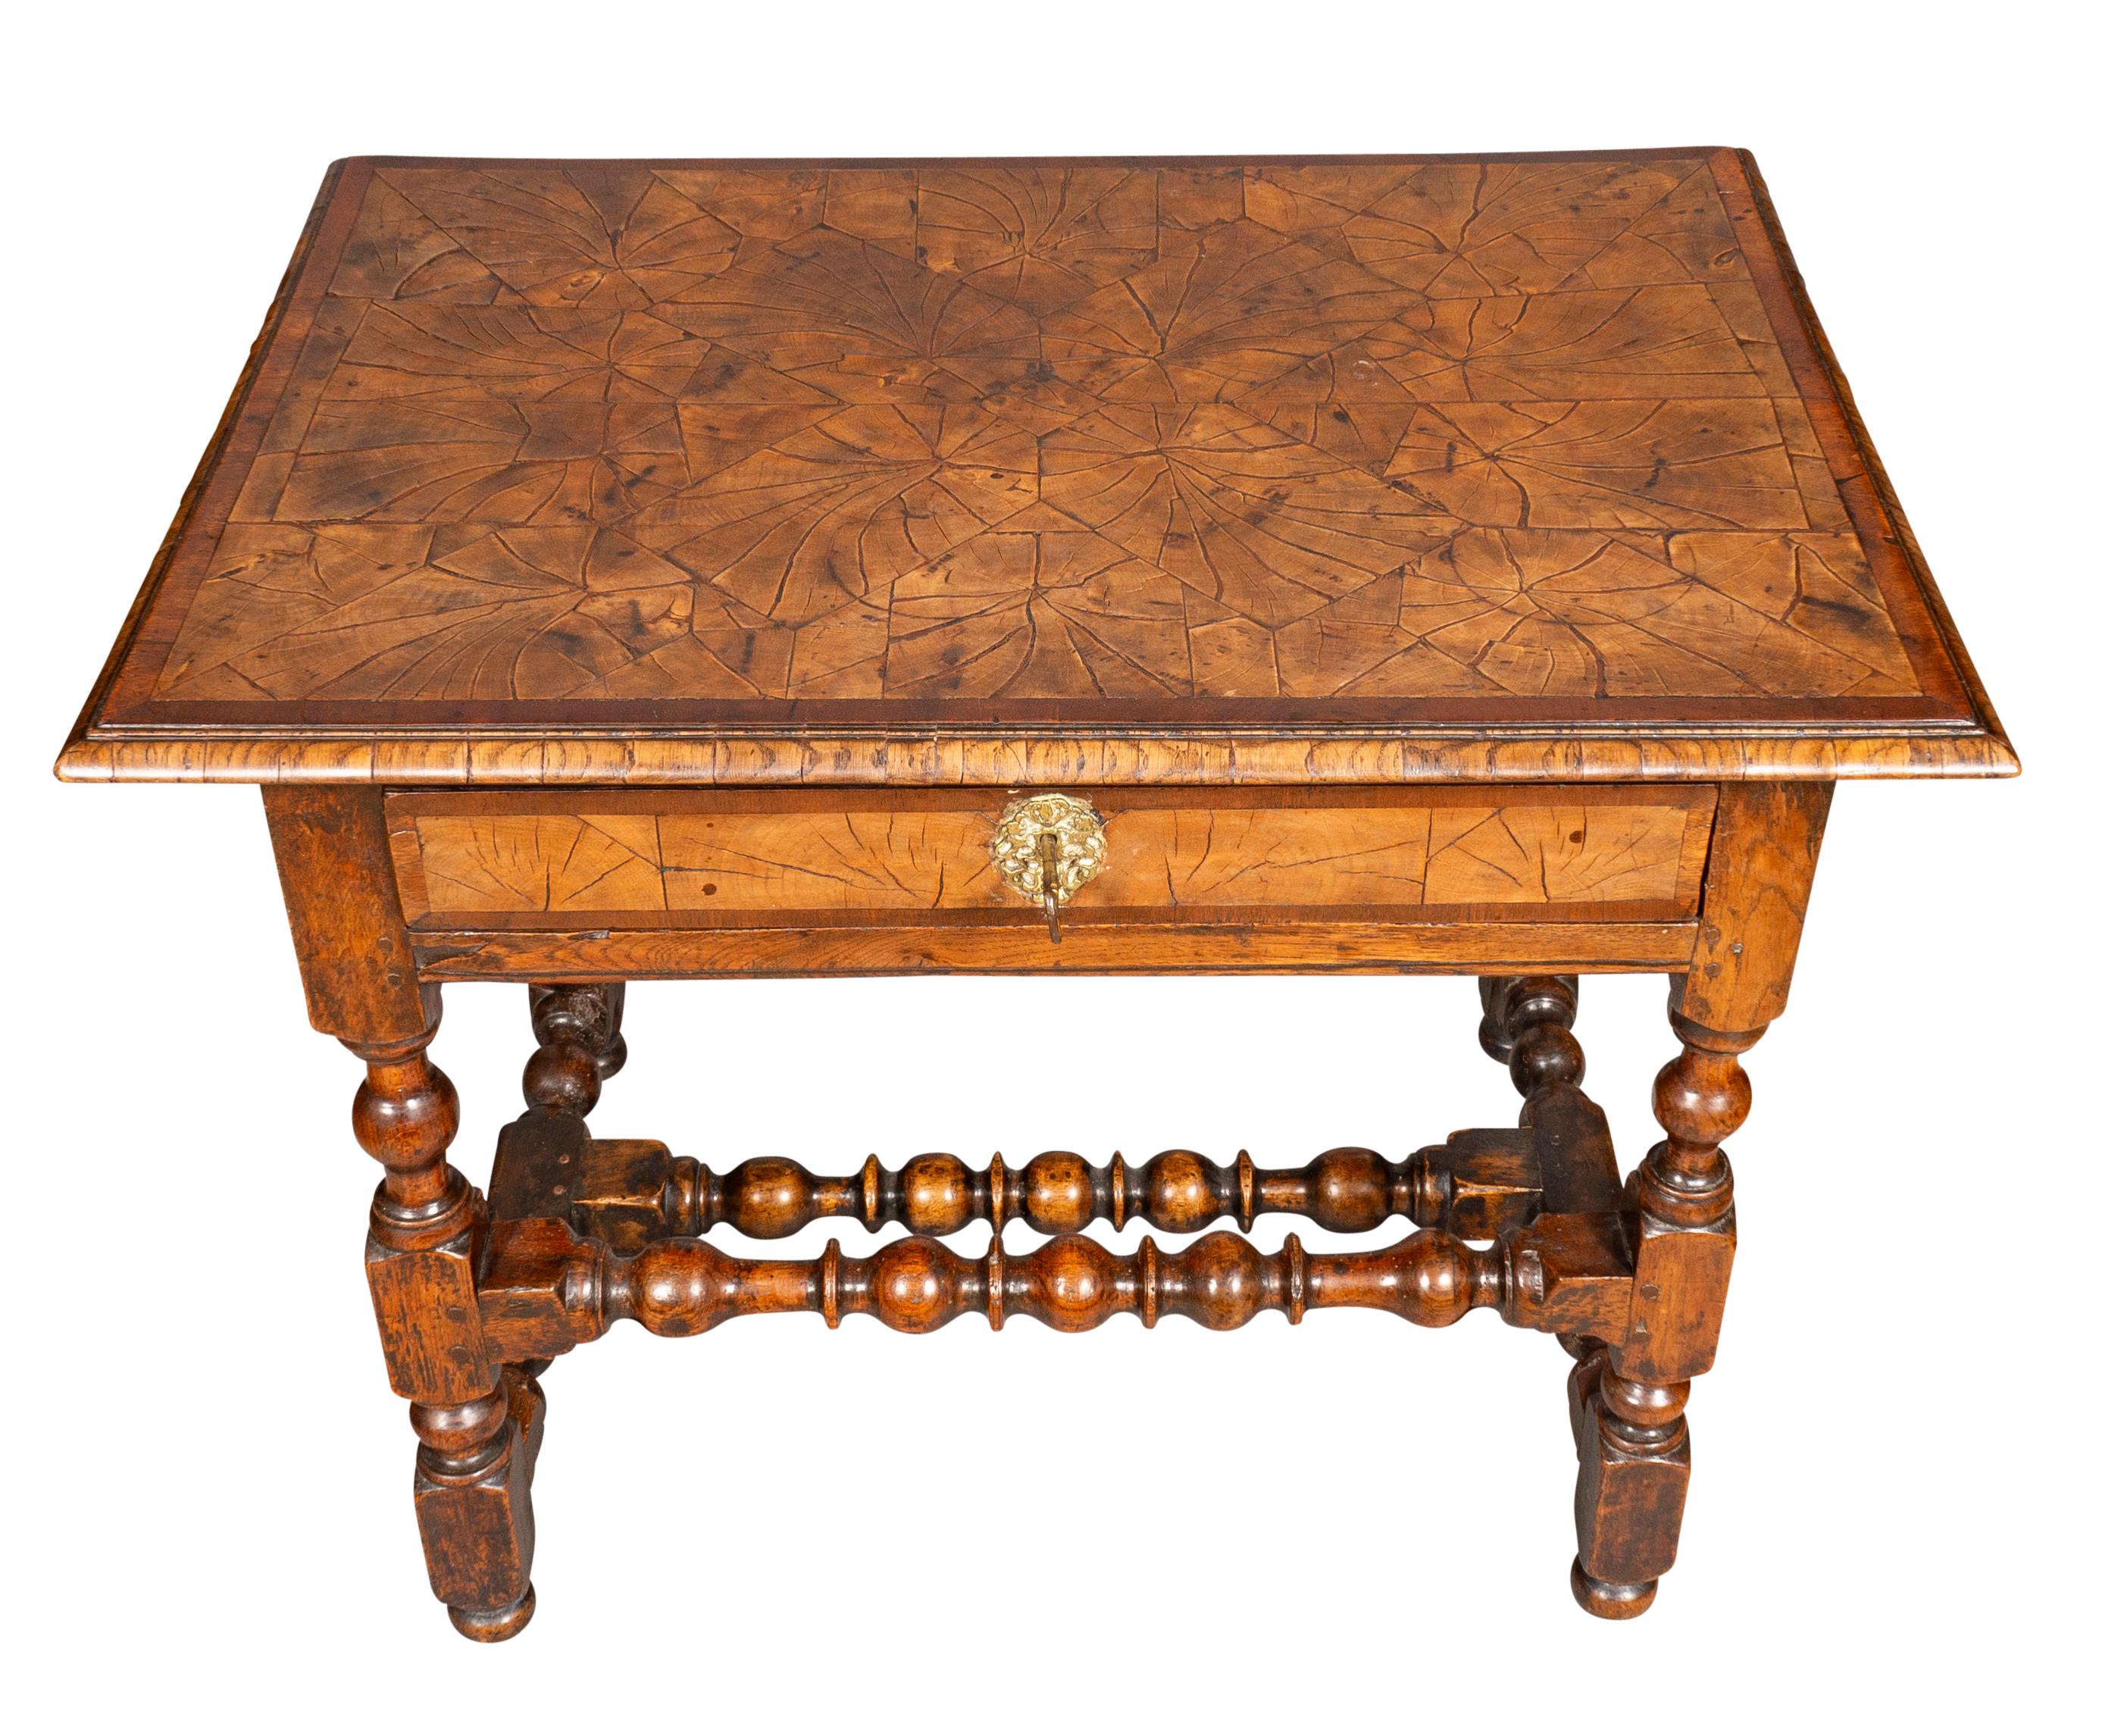 With a rectangular top with oak oyster veneer decoration. Over a drawer and raised on turned legs joined by turned stretchers. Button feet. A more unusual example with great patina.